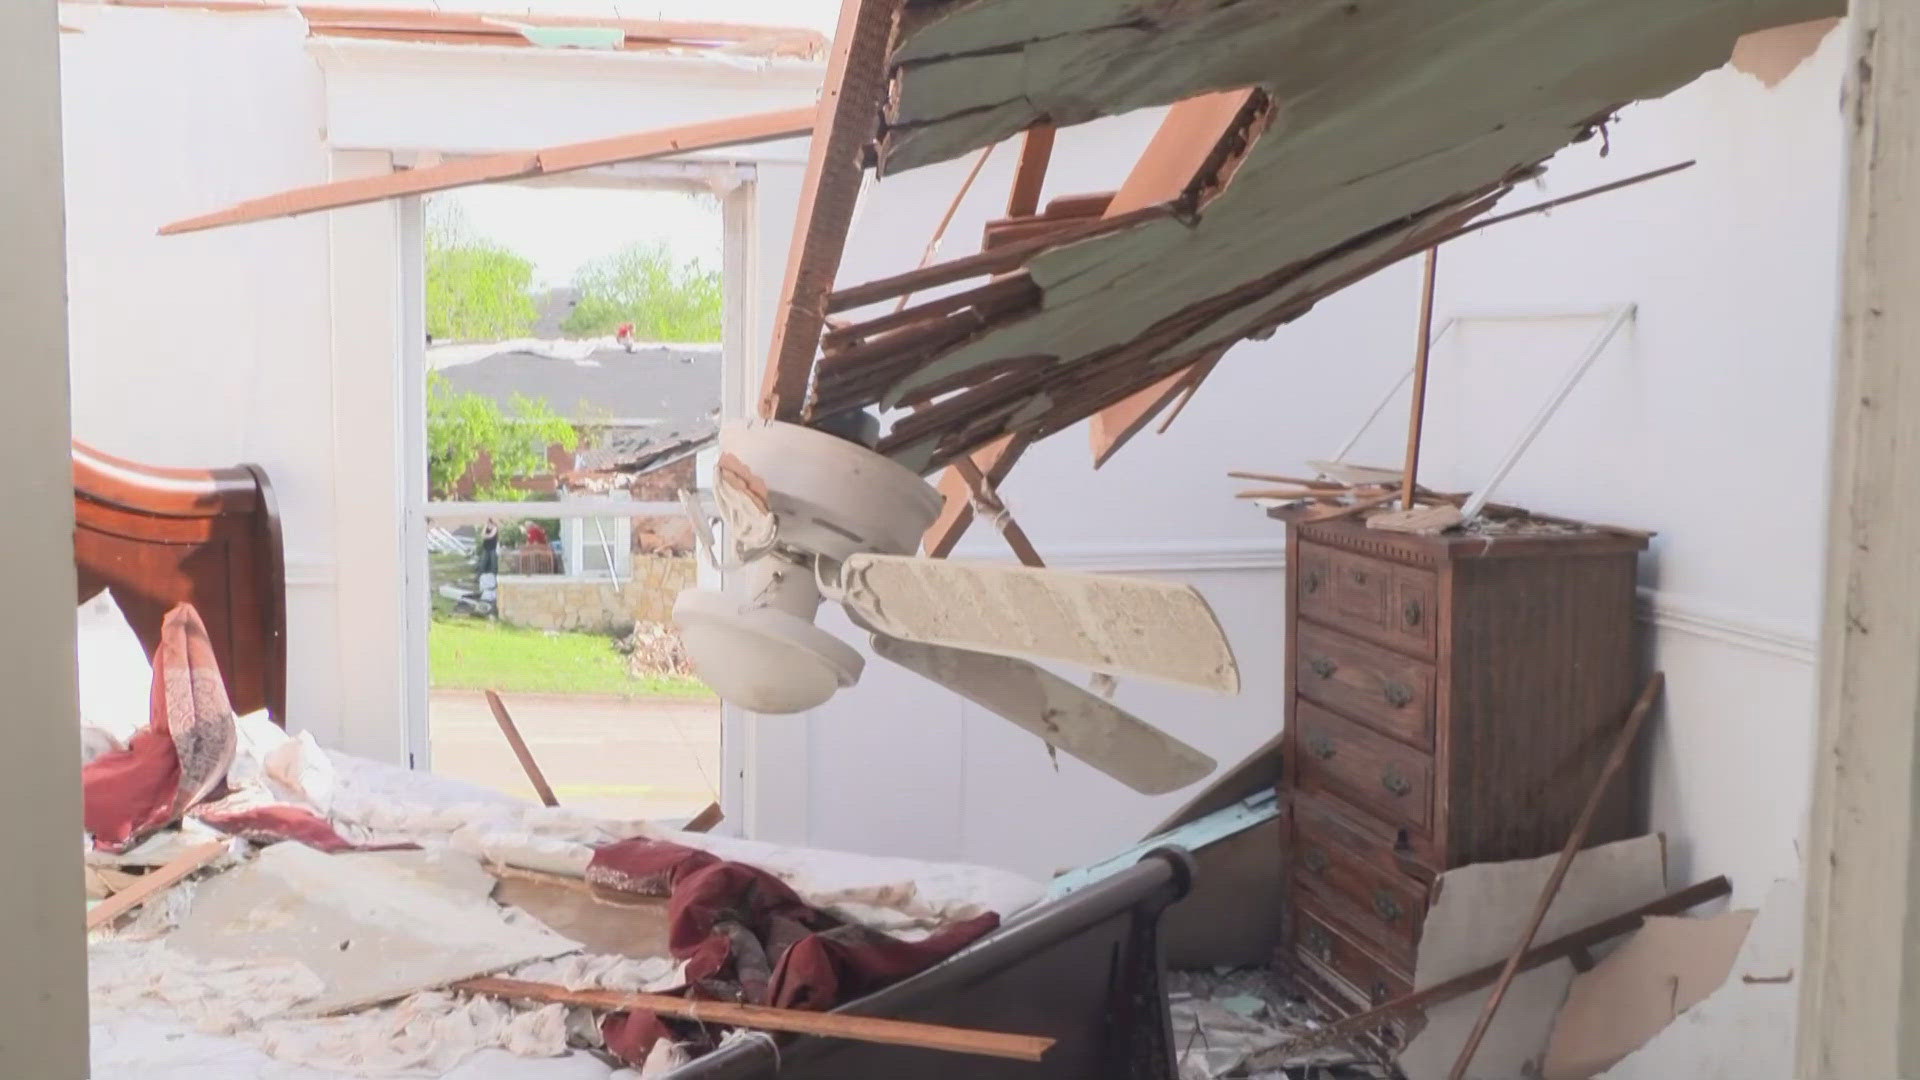 Tornadoes that tore through Oklahoma have flattened buildings, killed at least four people, widespread power outages, and left a trail of destruction.